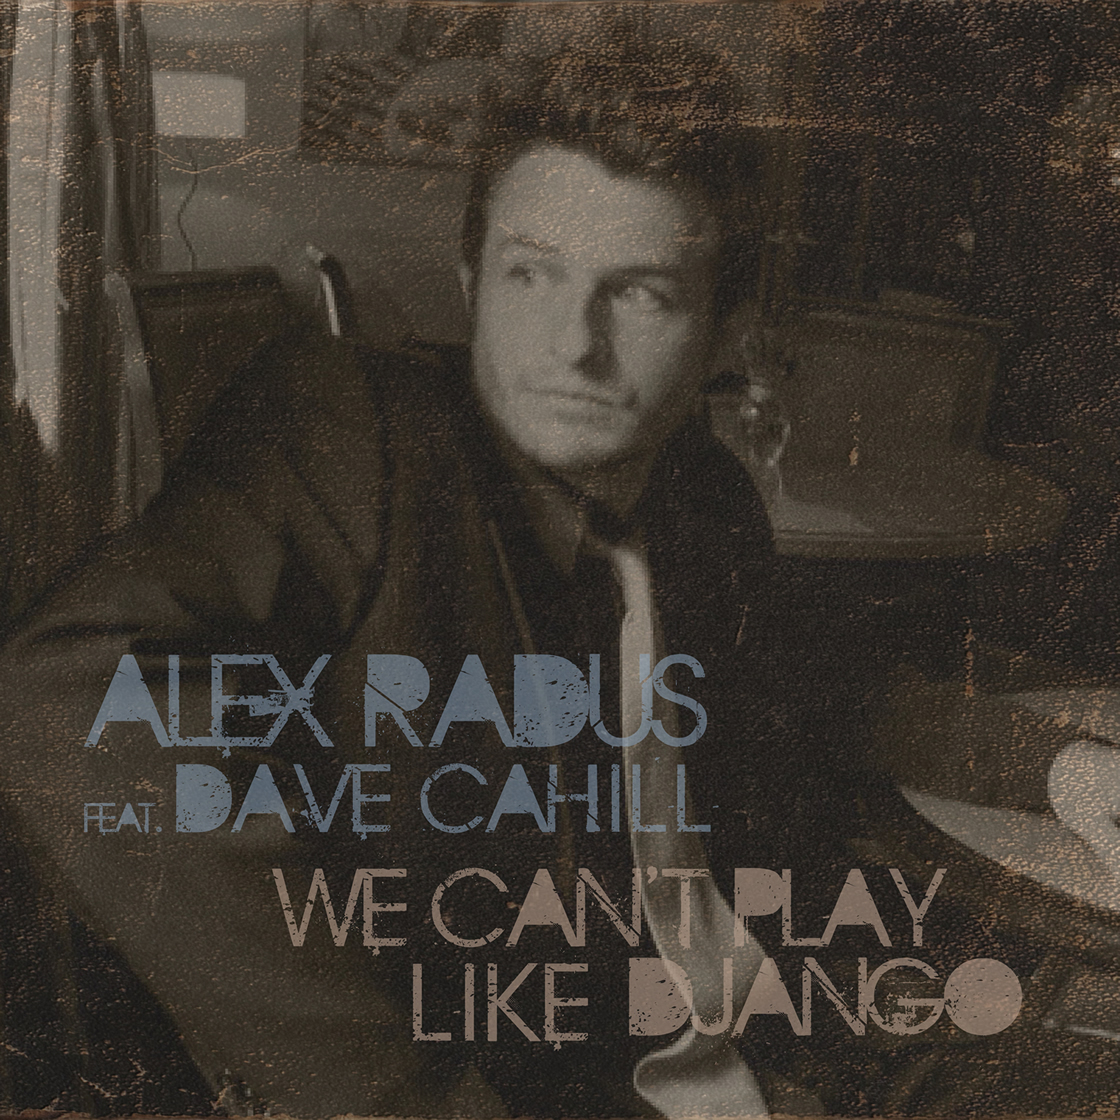 Alex Radus feat. Dave Cahill "We Can't Play Like Django"